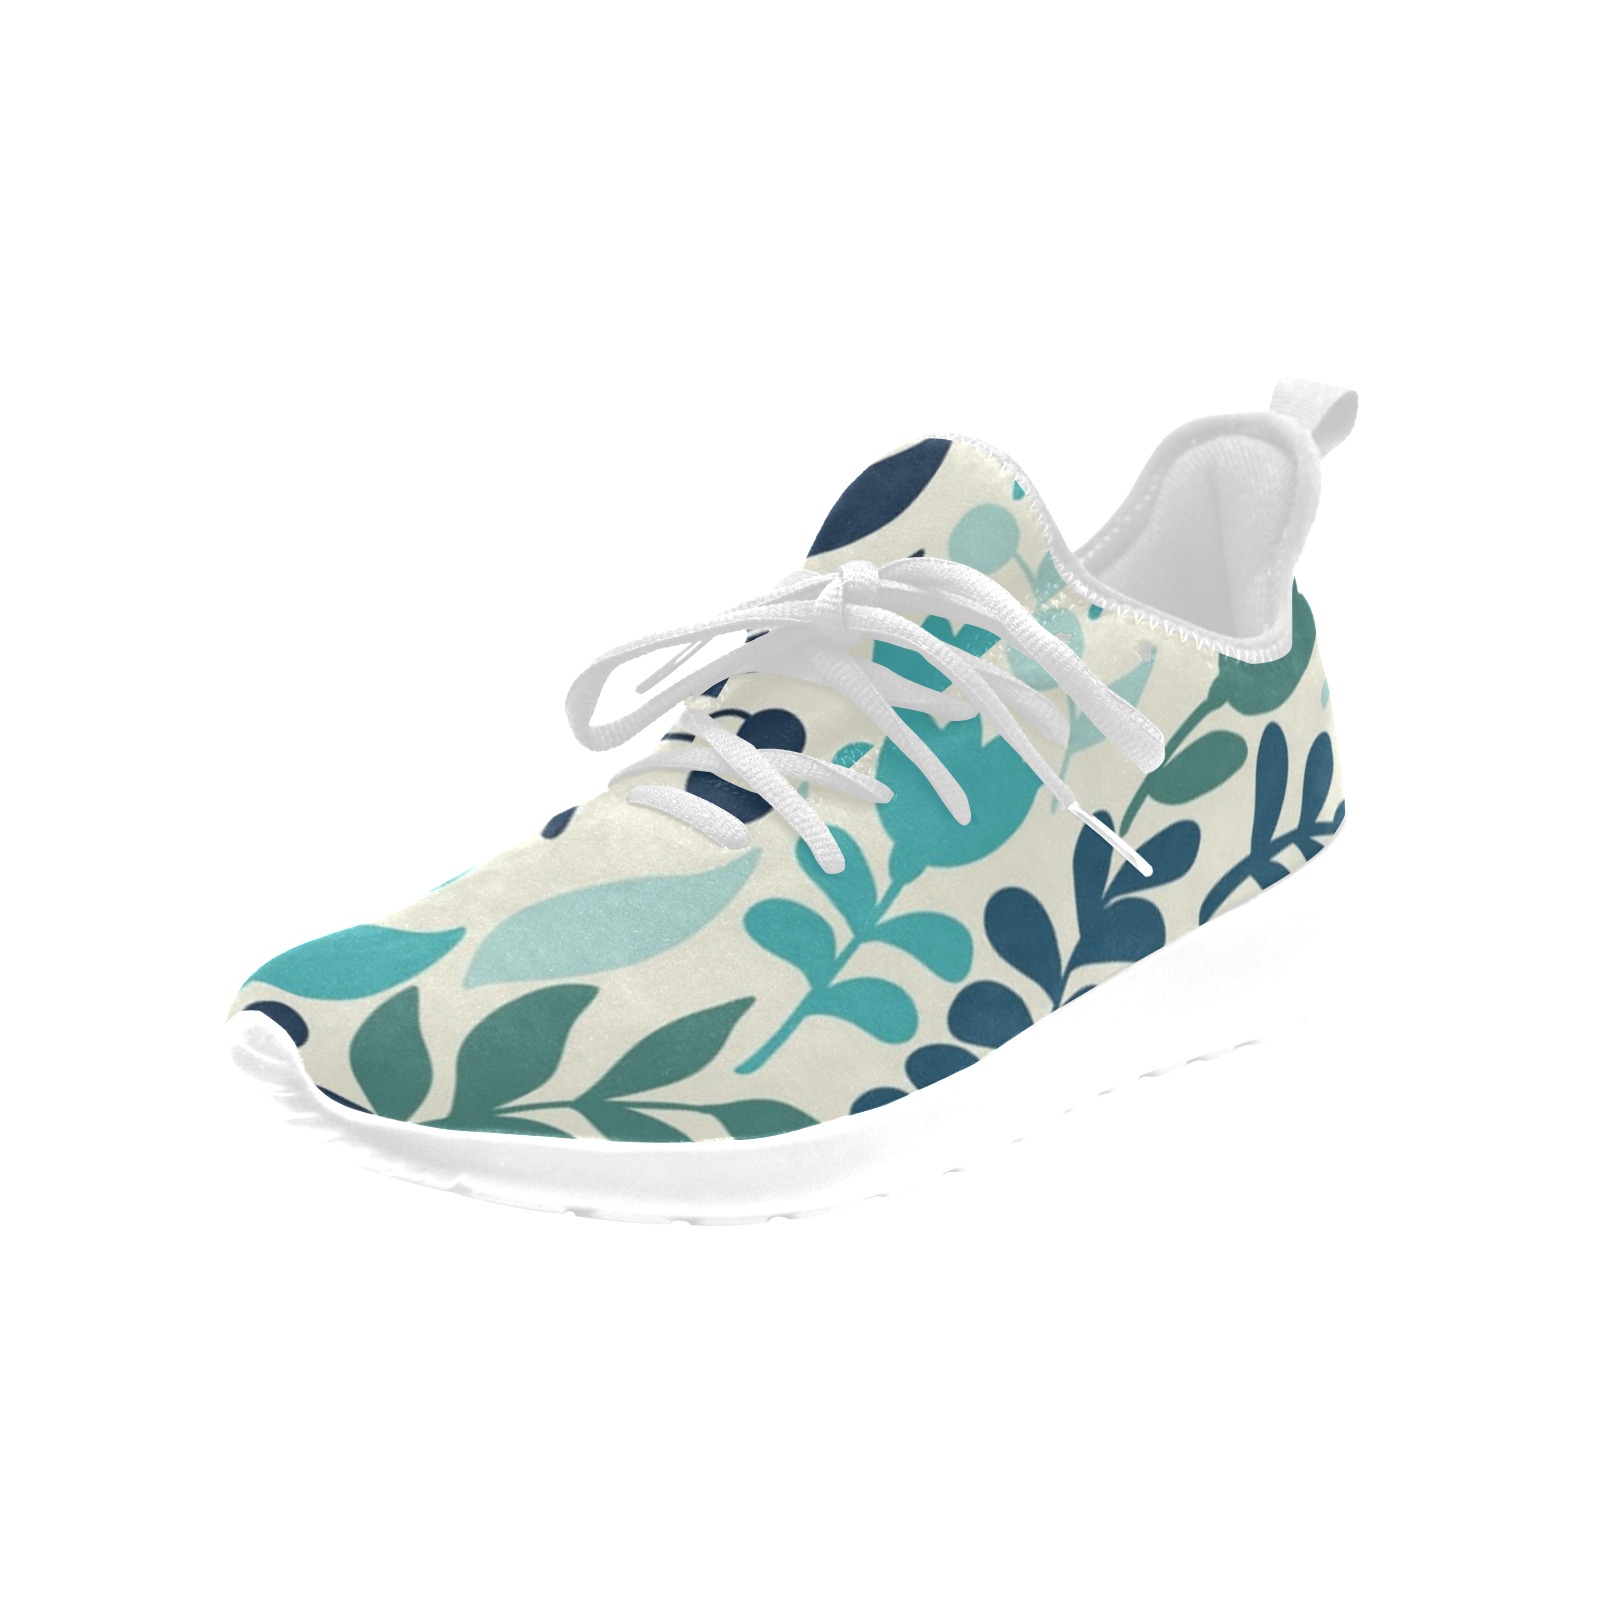 Doodle Floral with Leaves Women's One-Piece Vamp Sneakers (Model 67502)